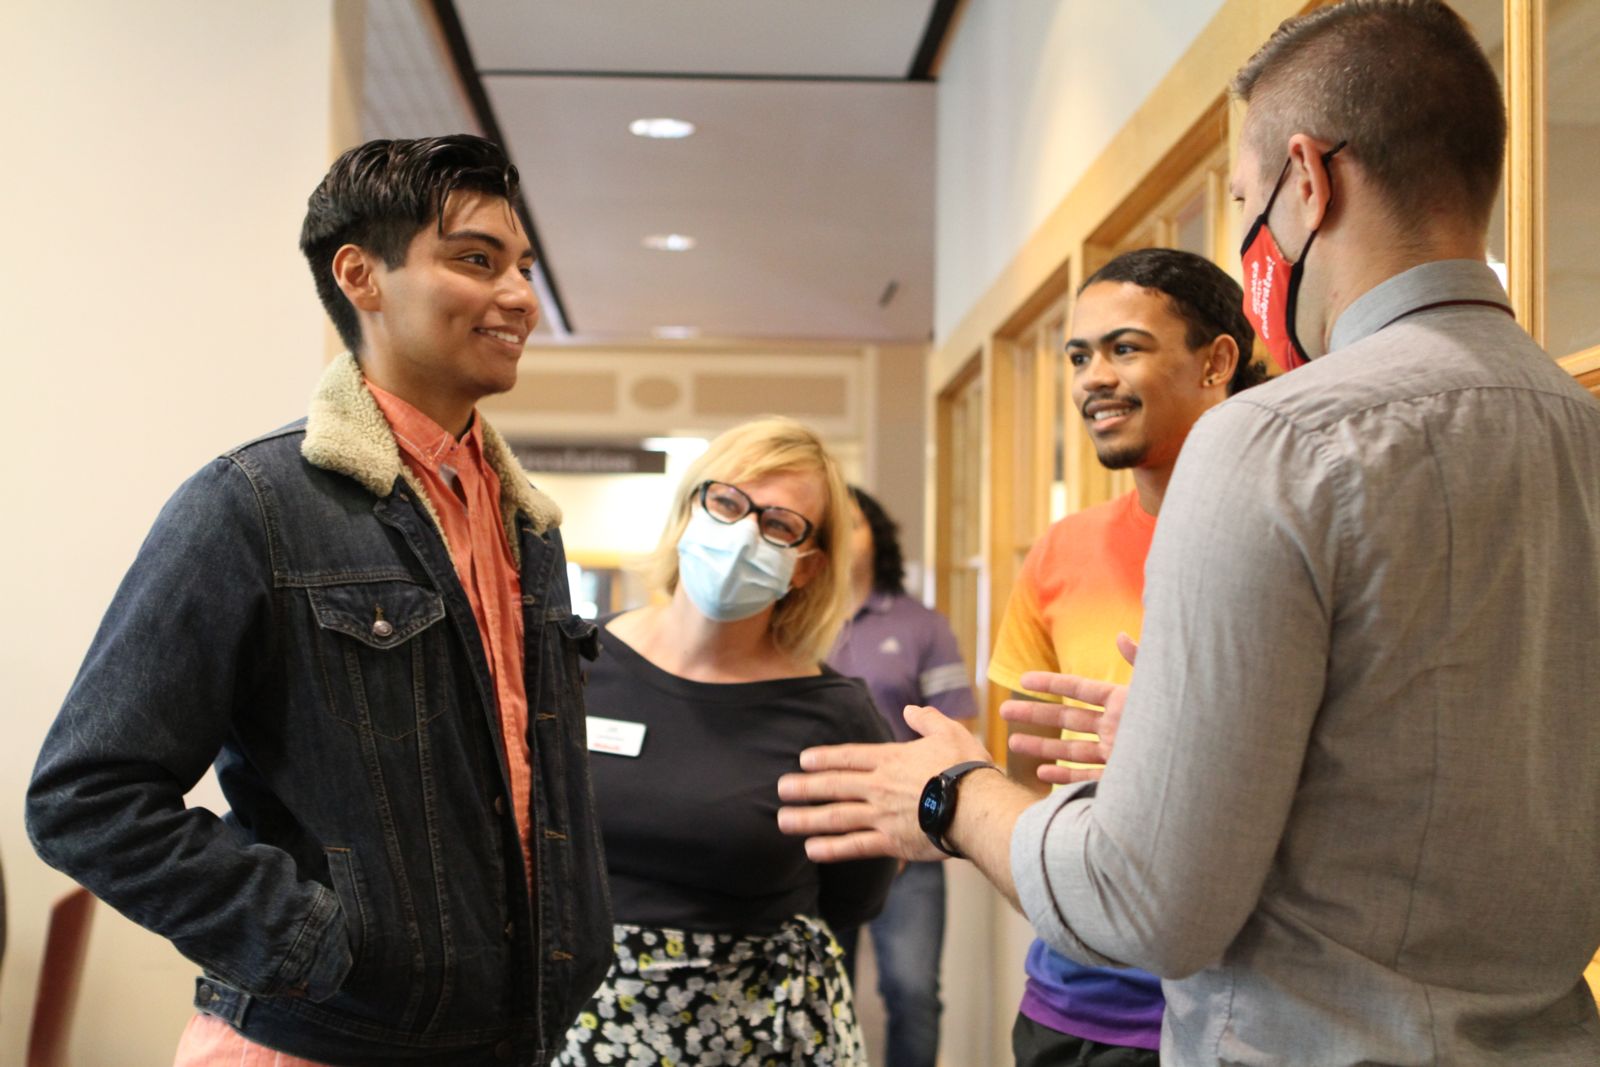 Students got to network with Wabash community members during the event.